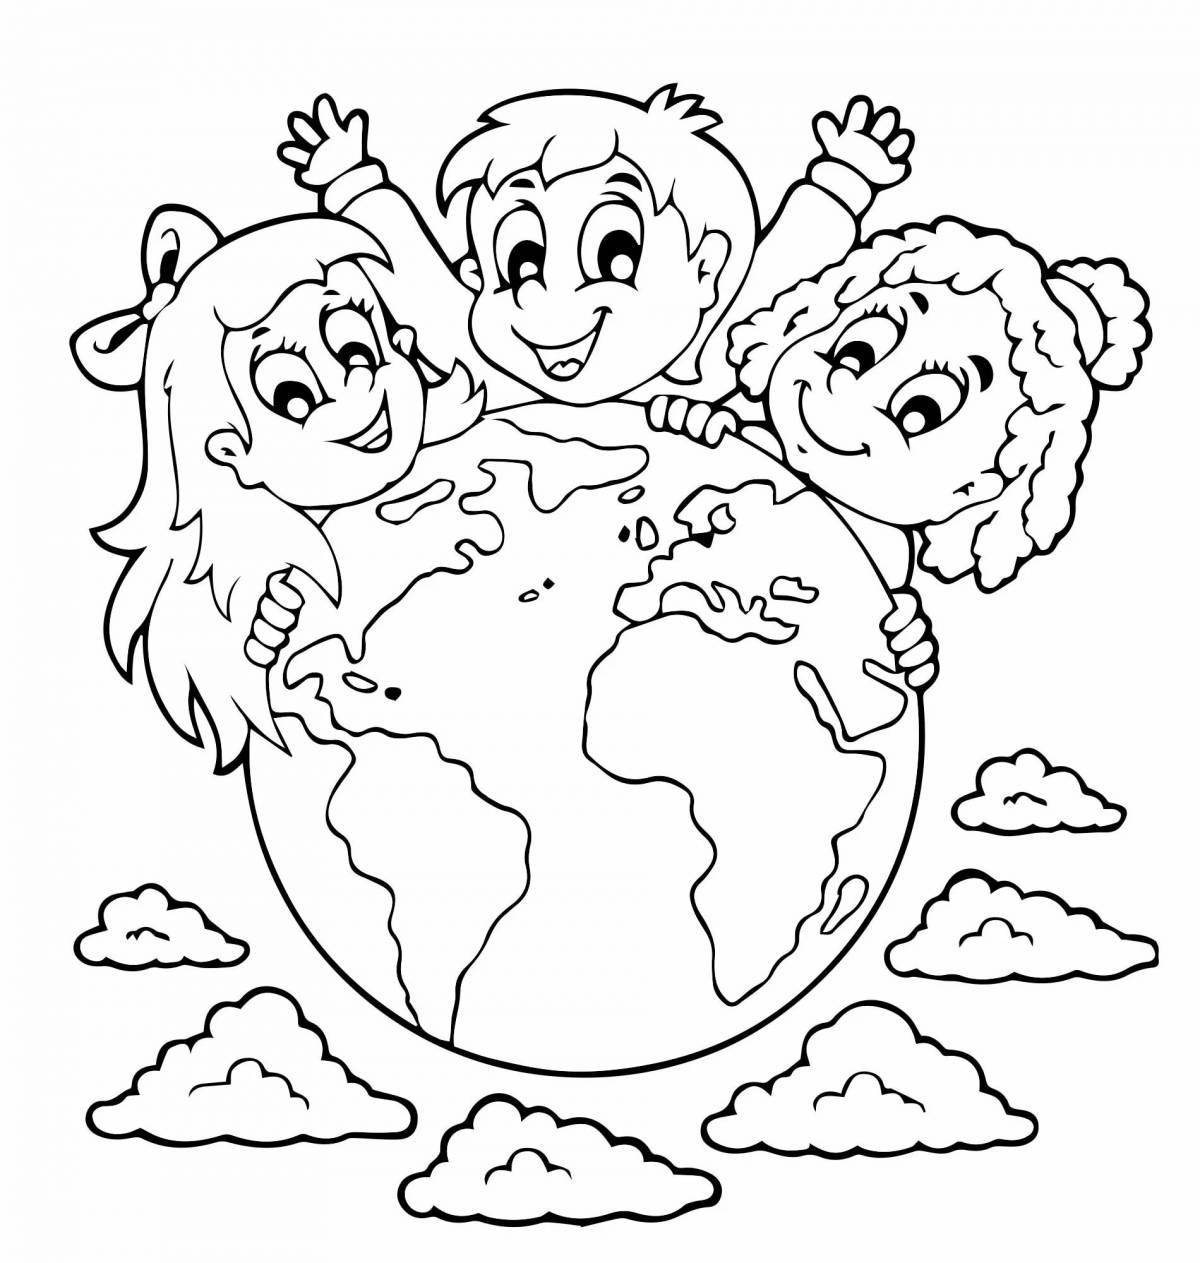 Fun we are for the world for children coloring page